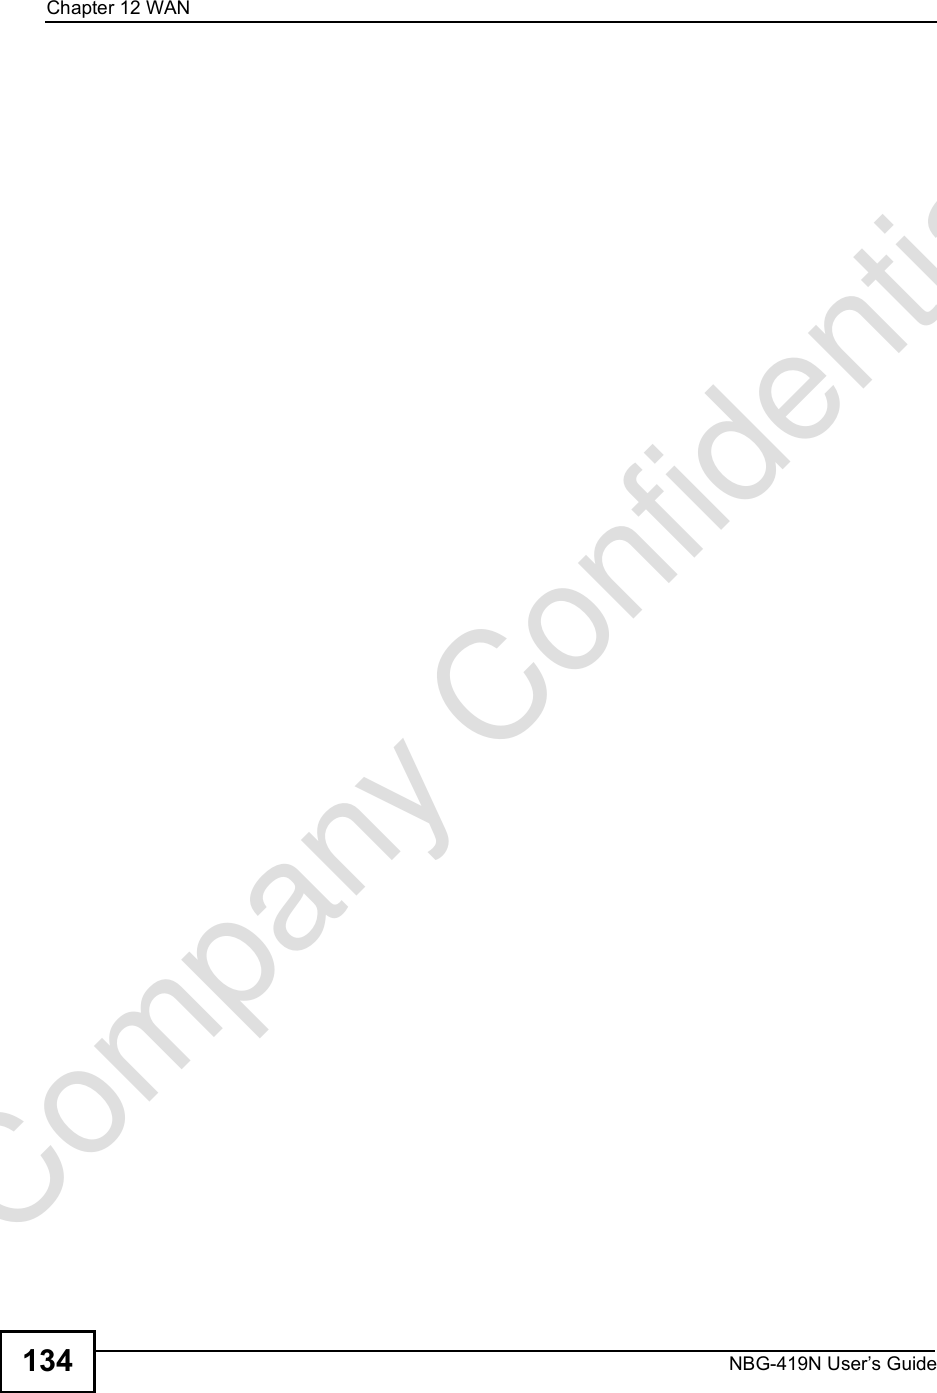 Chapter 12WANNBG-419N User s Guide134Company Confidential